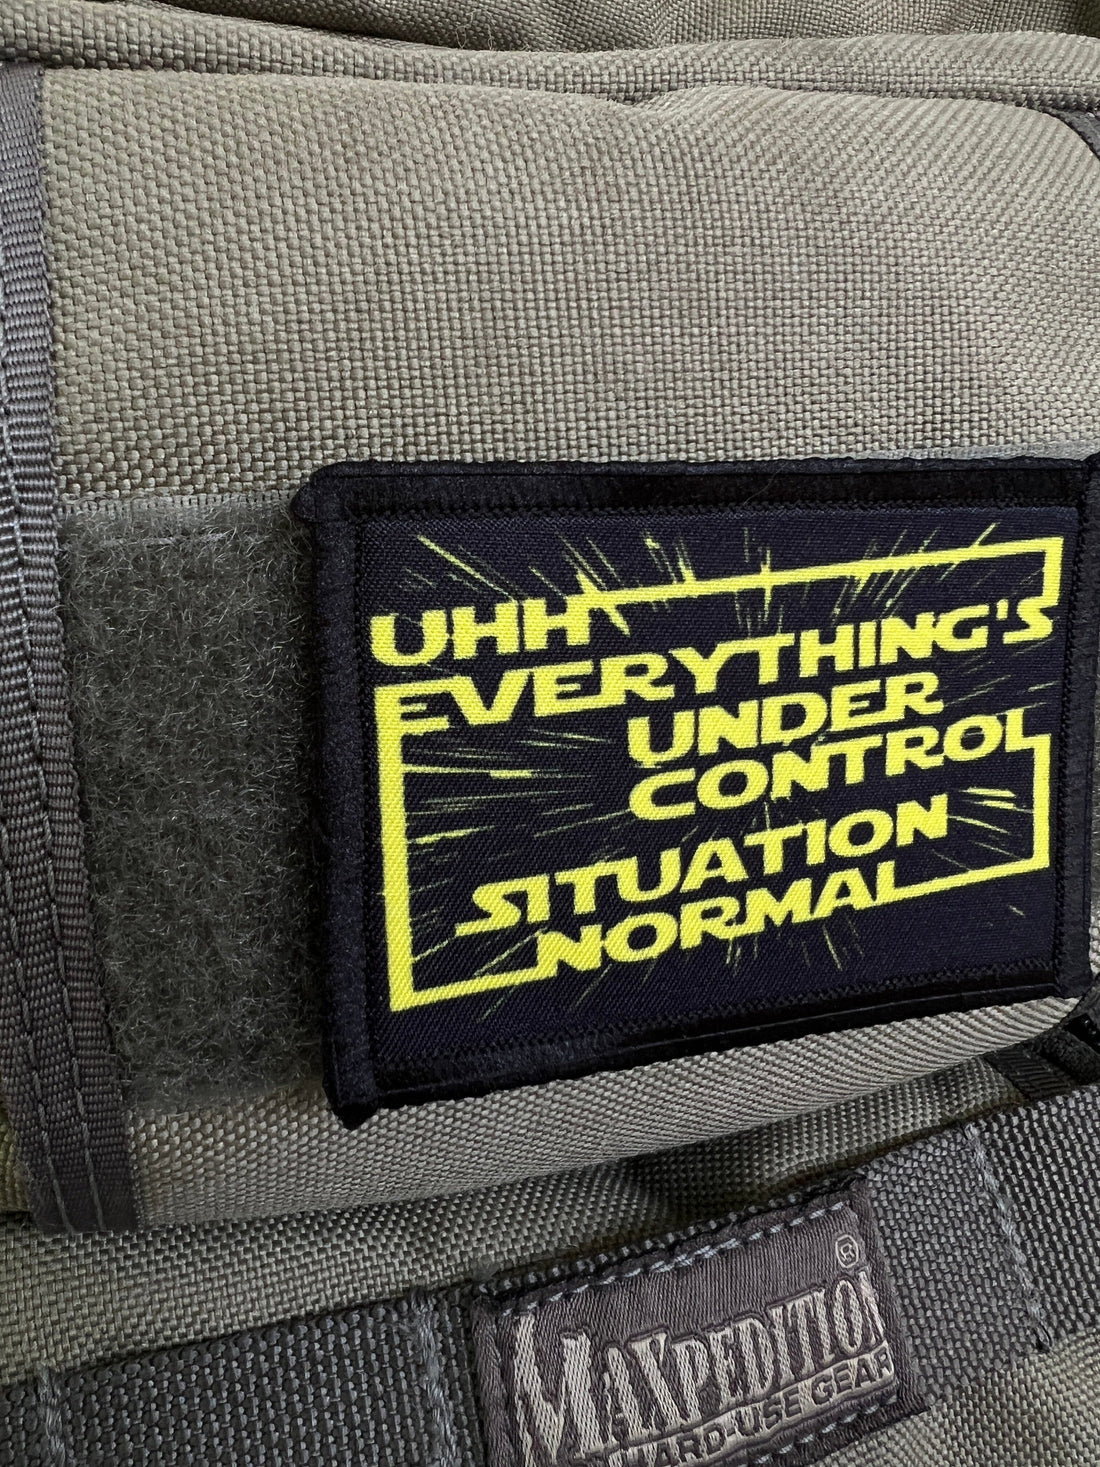 Why "Situation Normal" Is the Perfect Morale Patch for Your Gear